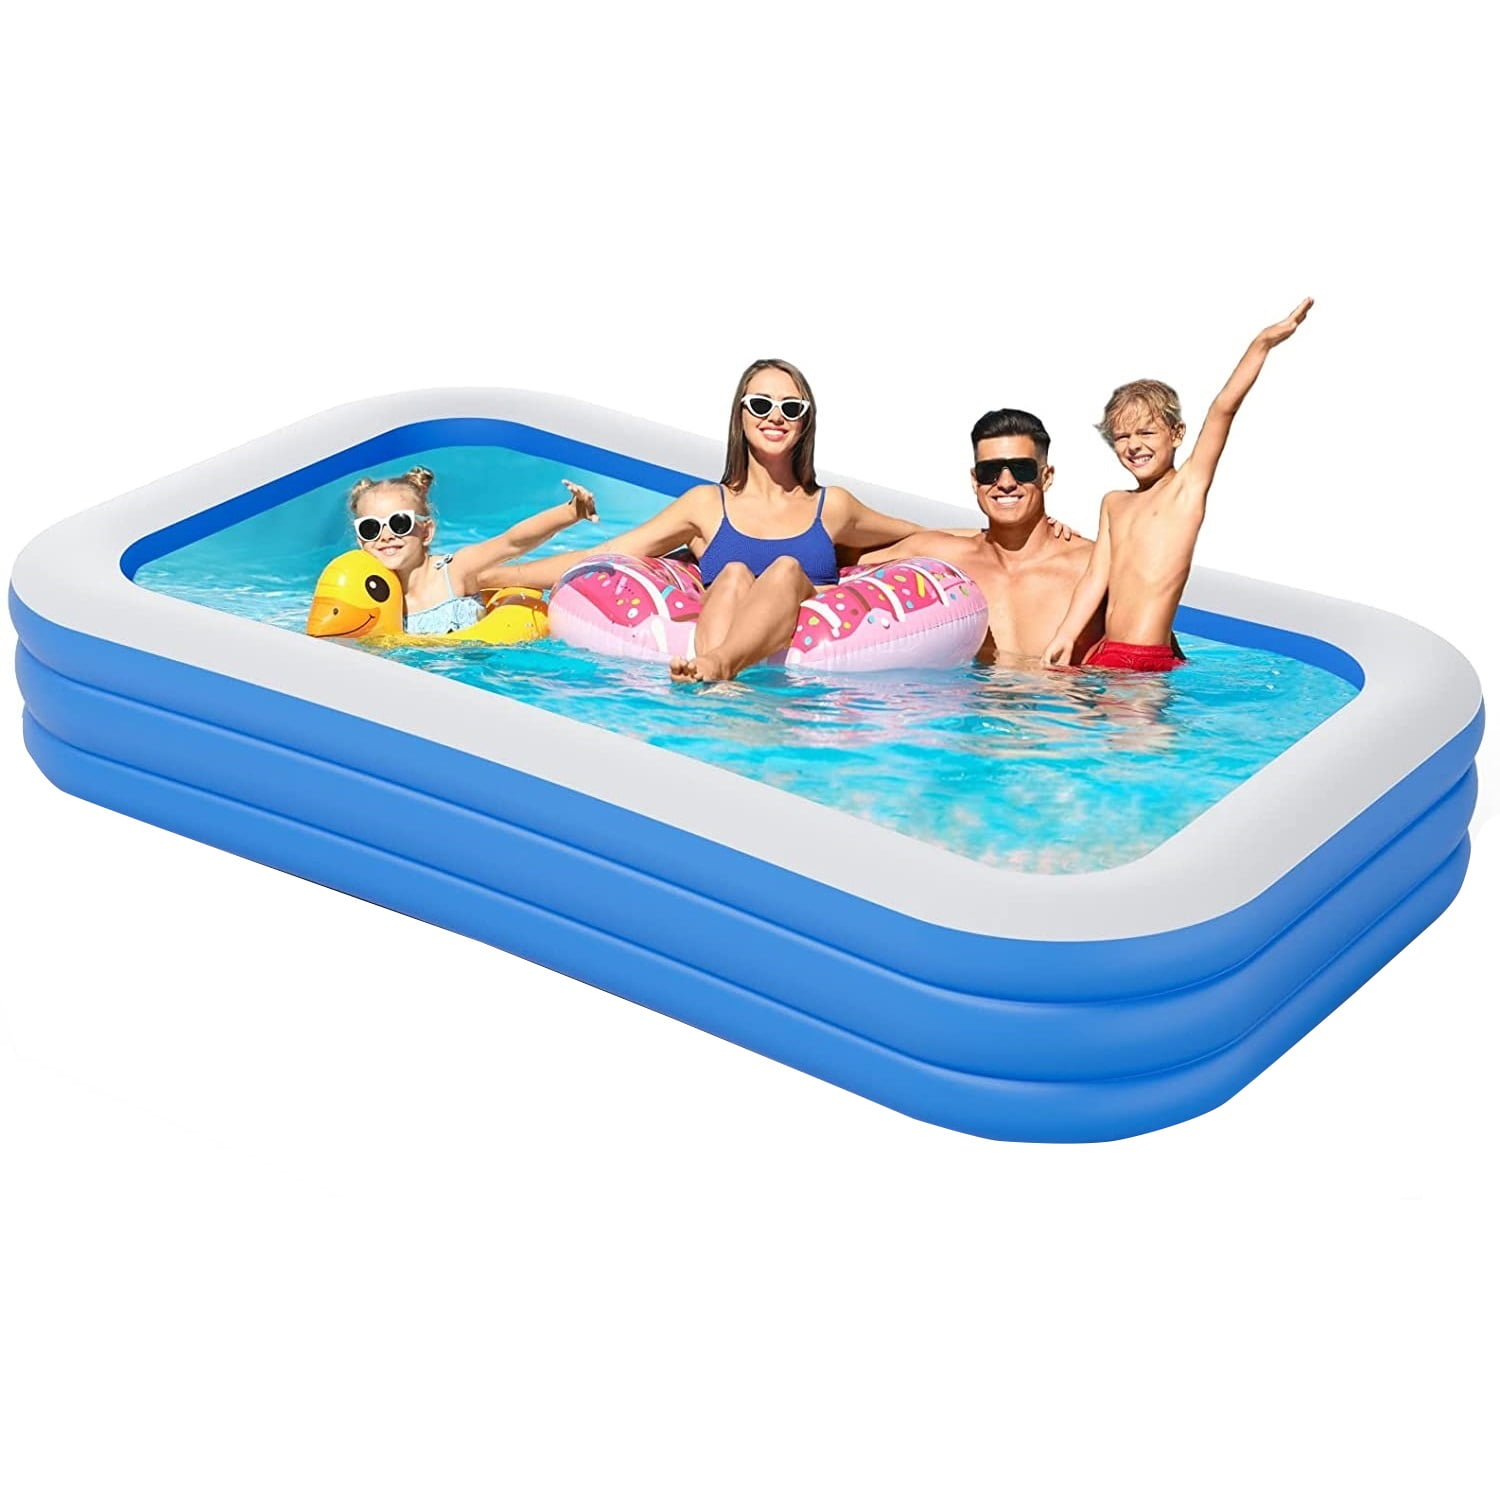 Play Day Square Inflatable Deluxe Comfort Family Pool, Blue, Ages 